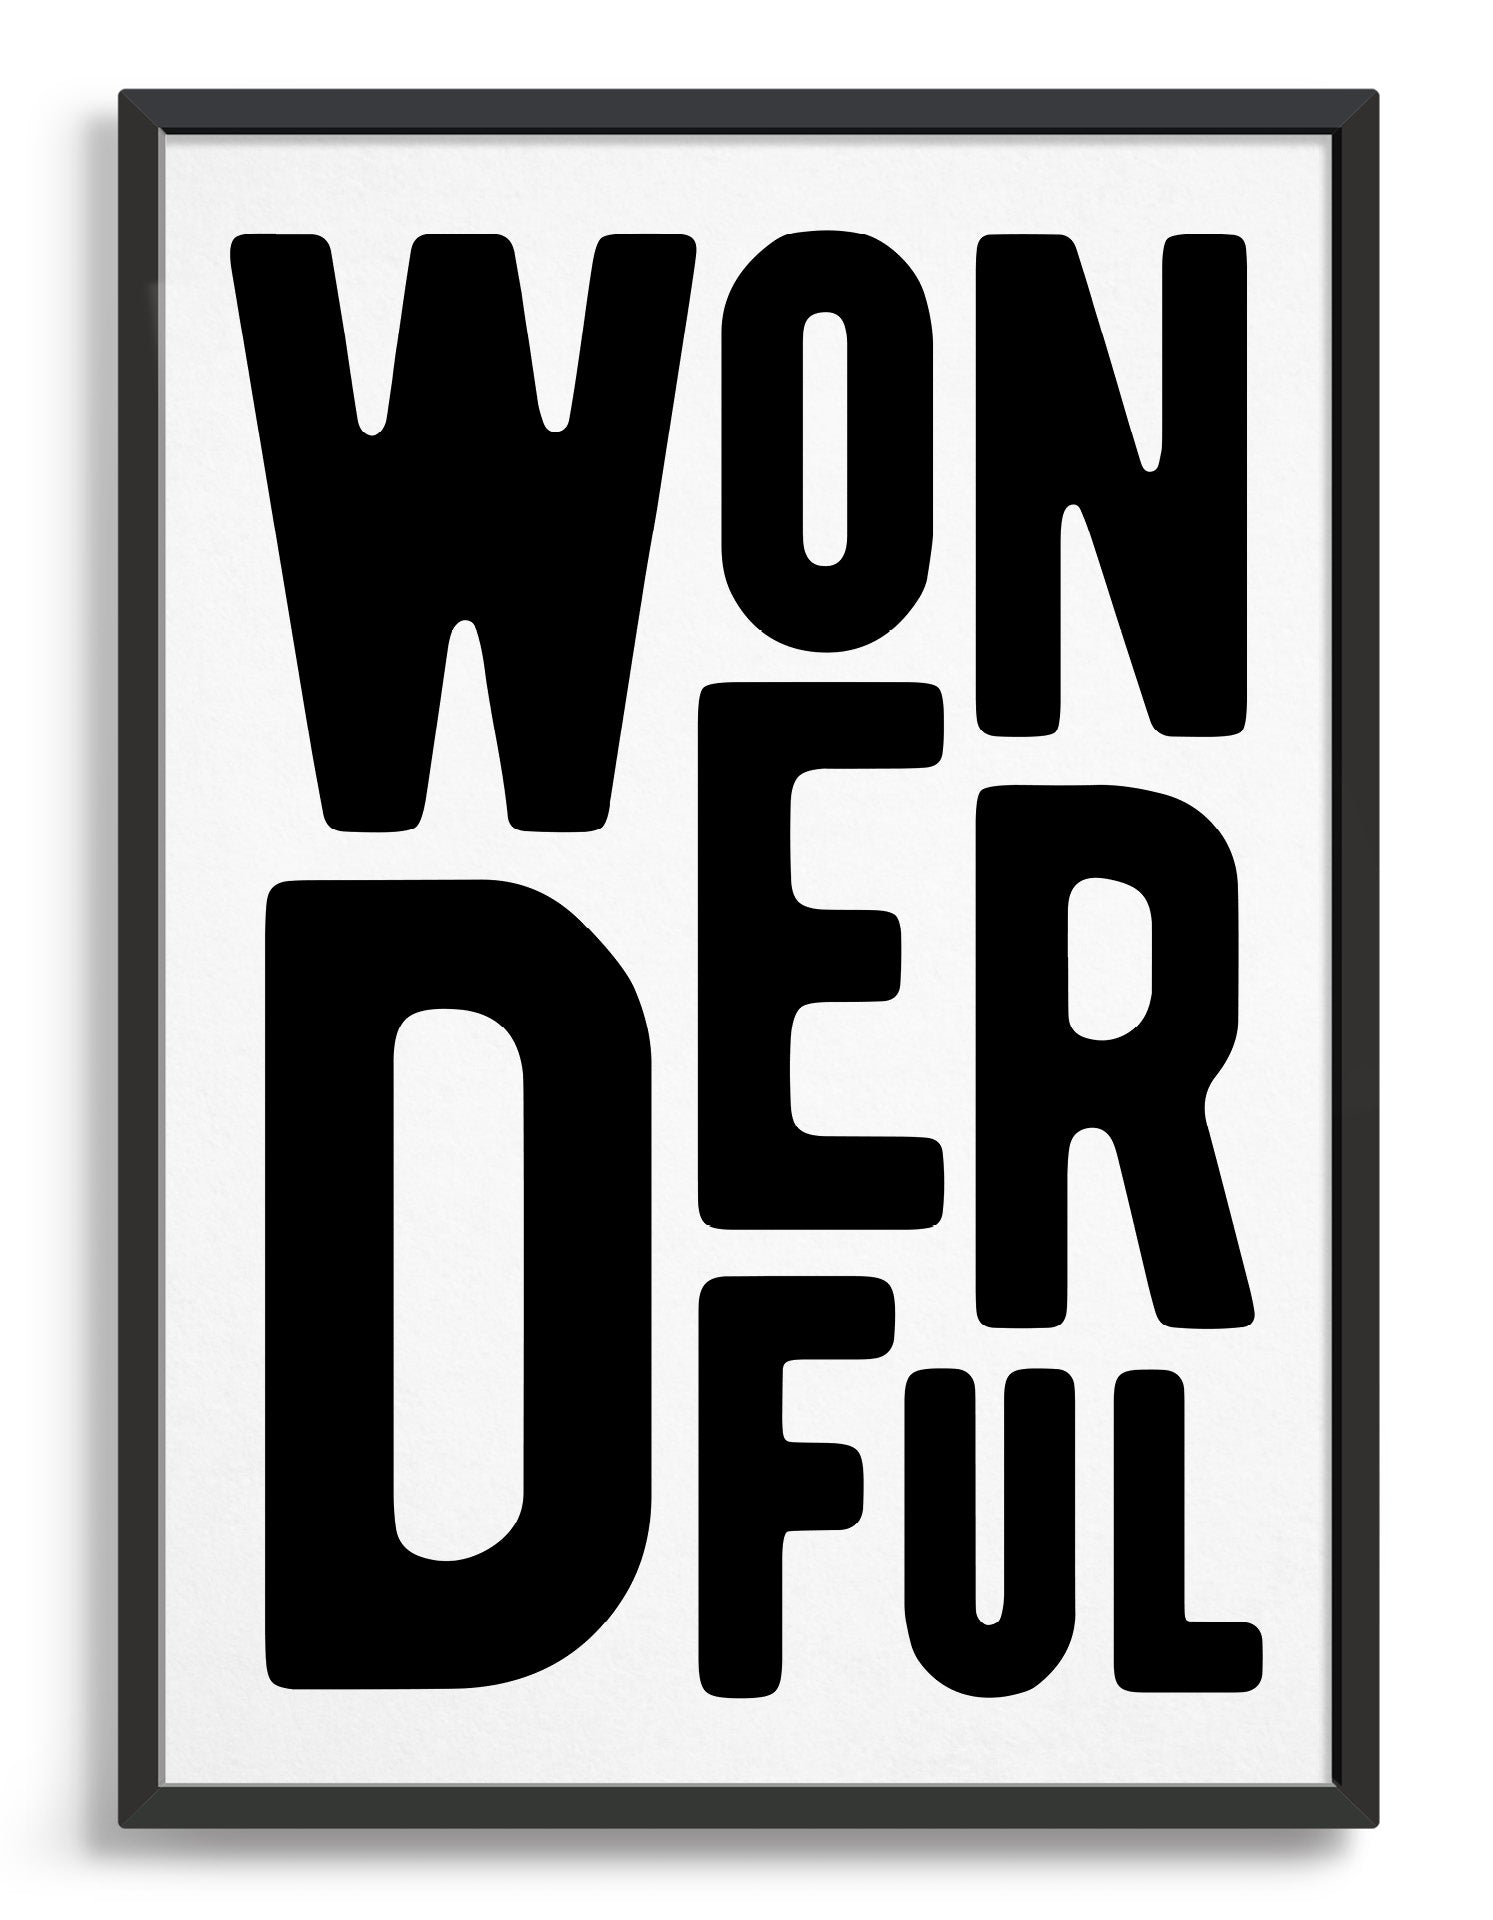 framed typography art print of the word wonderful in black text on a black background